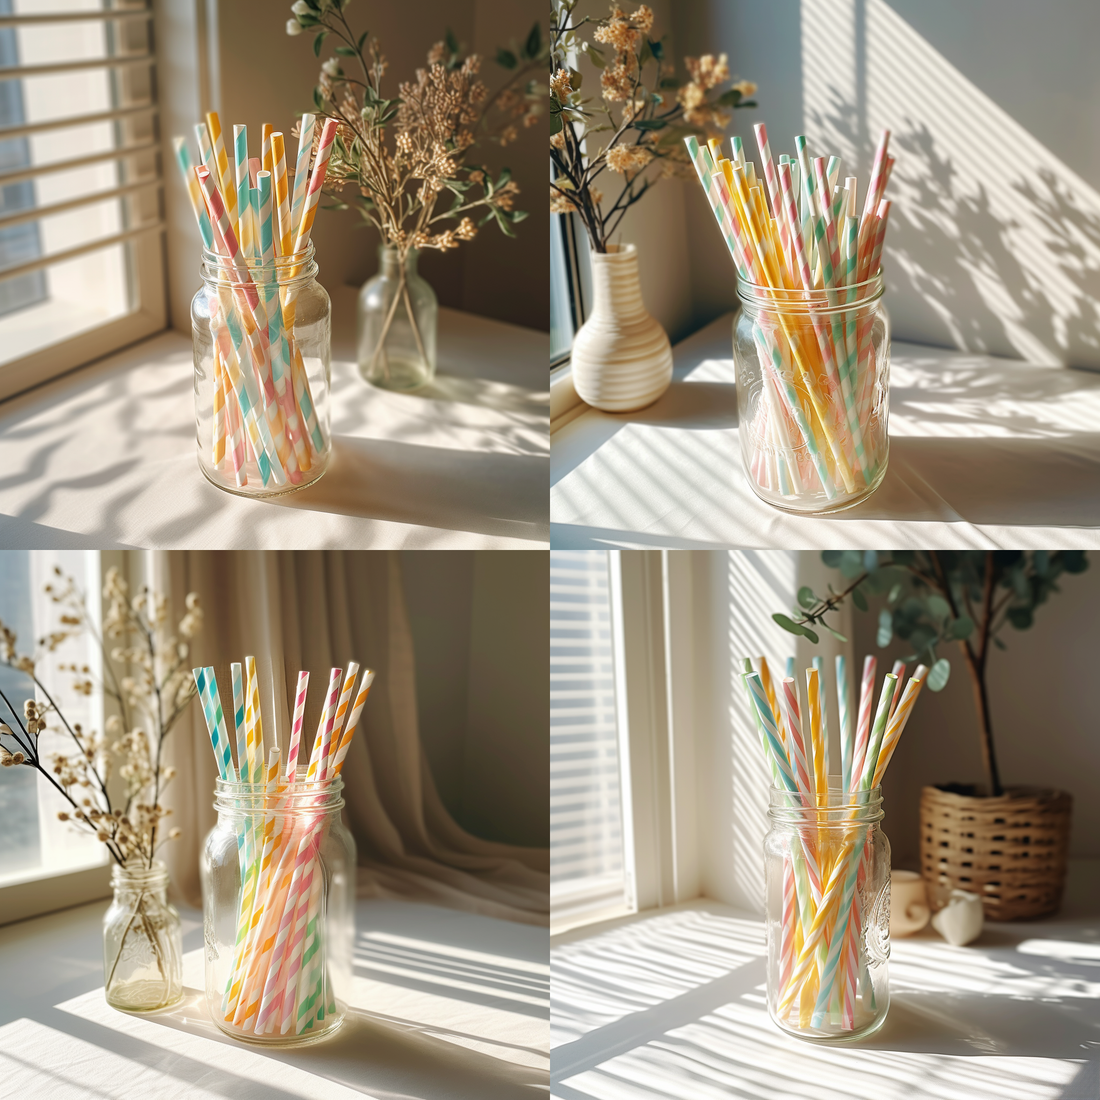 Say Goodbye to Plastic: Eco-Friendly Straws Ushering in a New Life